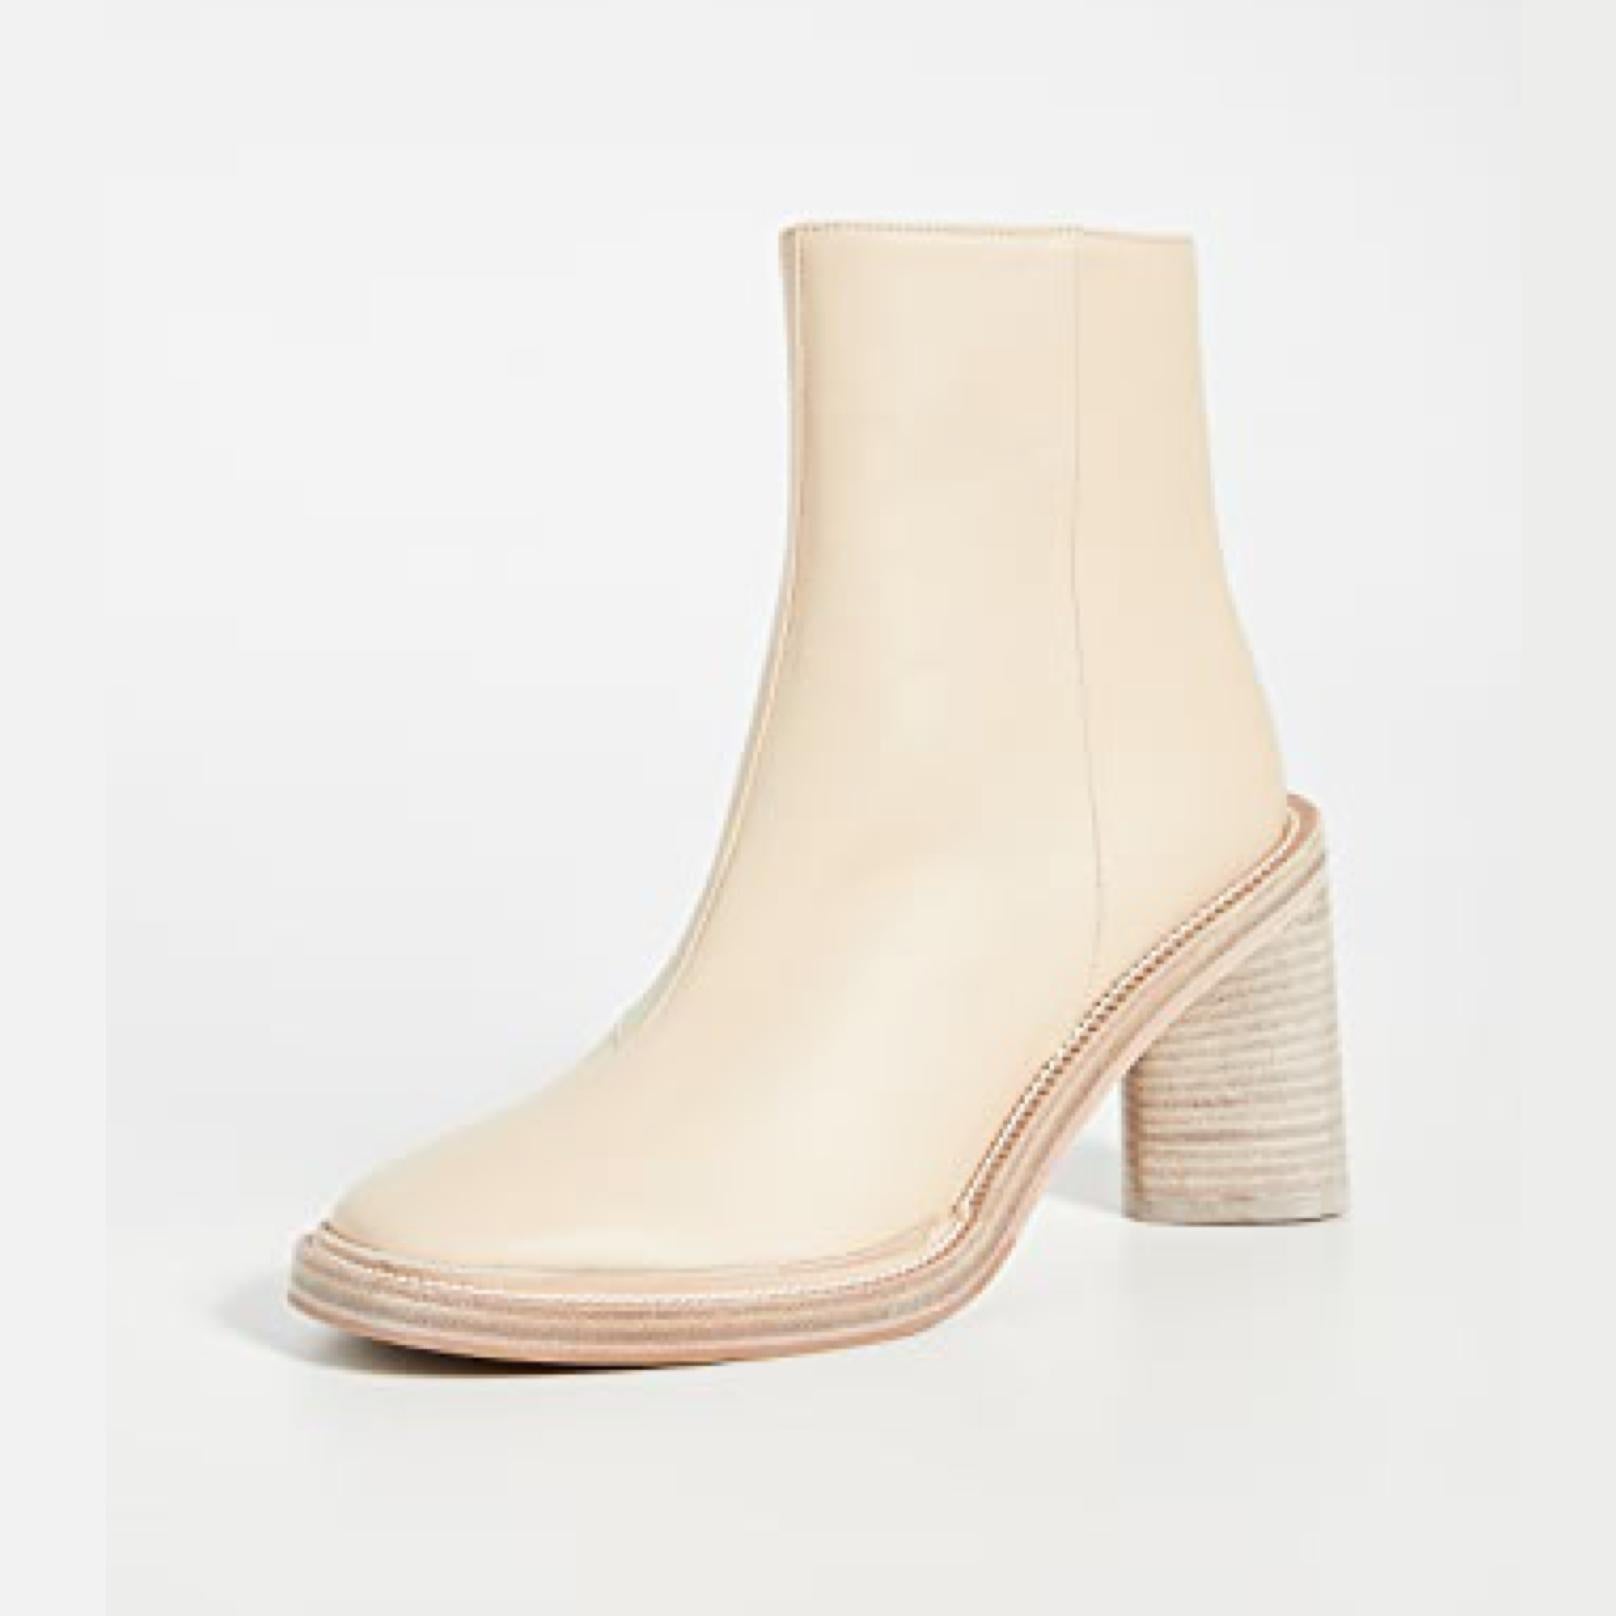 The ankle boots are made with supple lamb leather in beige and feature a squared toe, a triangular stacked block heel measuring 90 mm (3.5”) and an inner tonal zip fastening.
Style ID: FN-WN-SHOE000260

COLOR: Beige
MATERIAL: Lamb leather uppers,